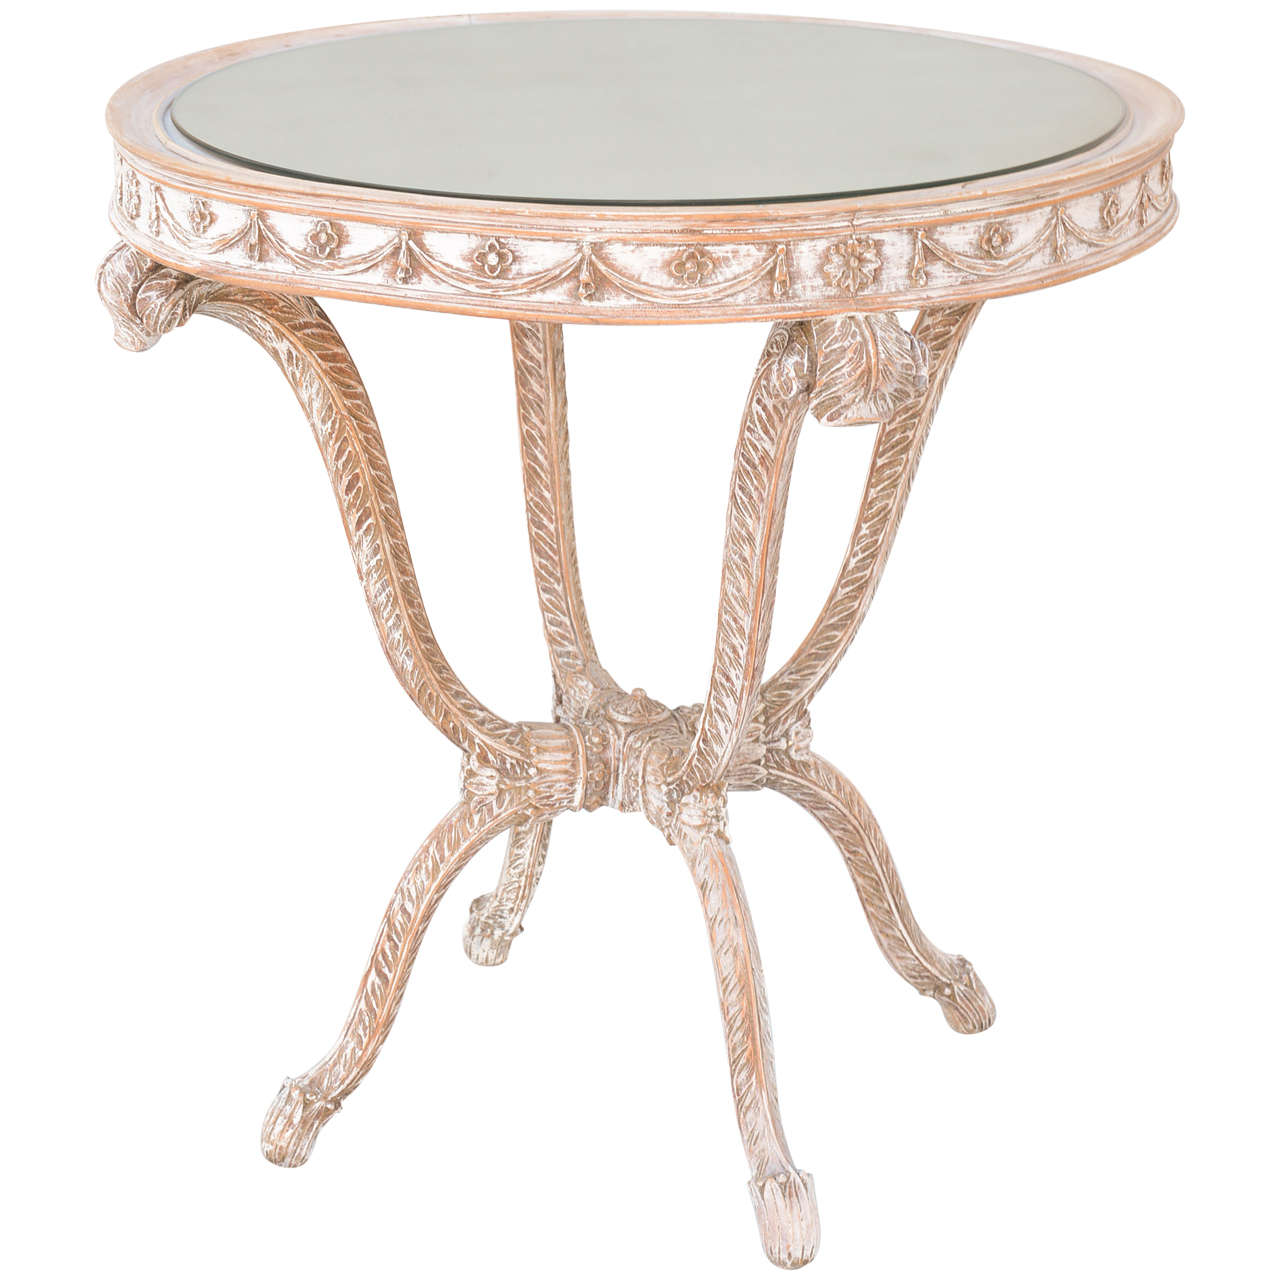 Italian Occasional Table with Mirrored Top on Carved Wood "Plume" Base